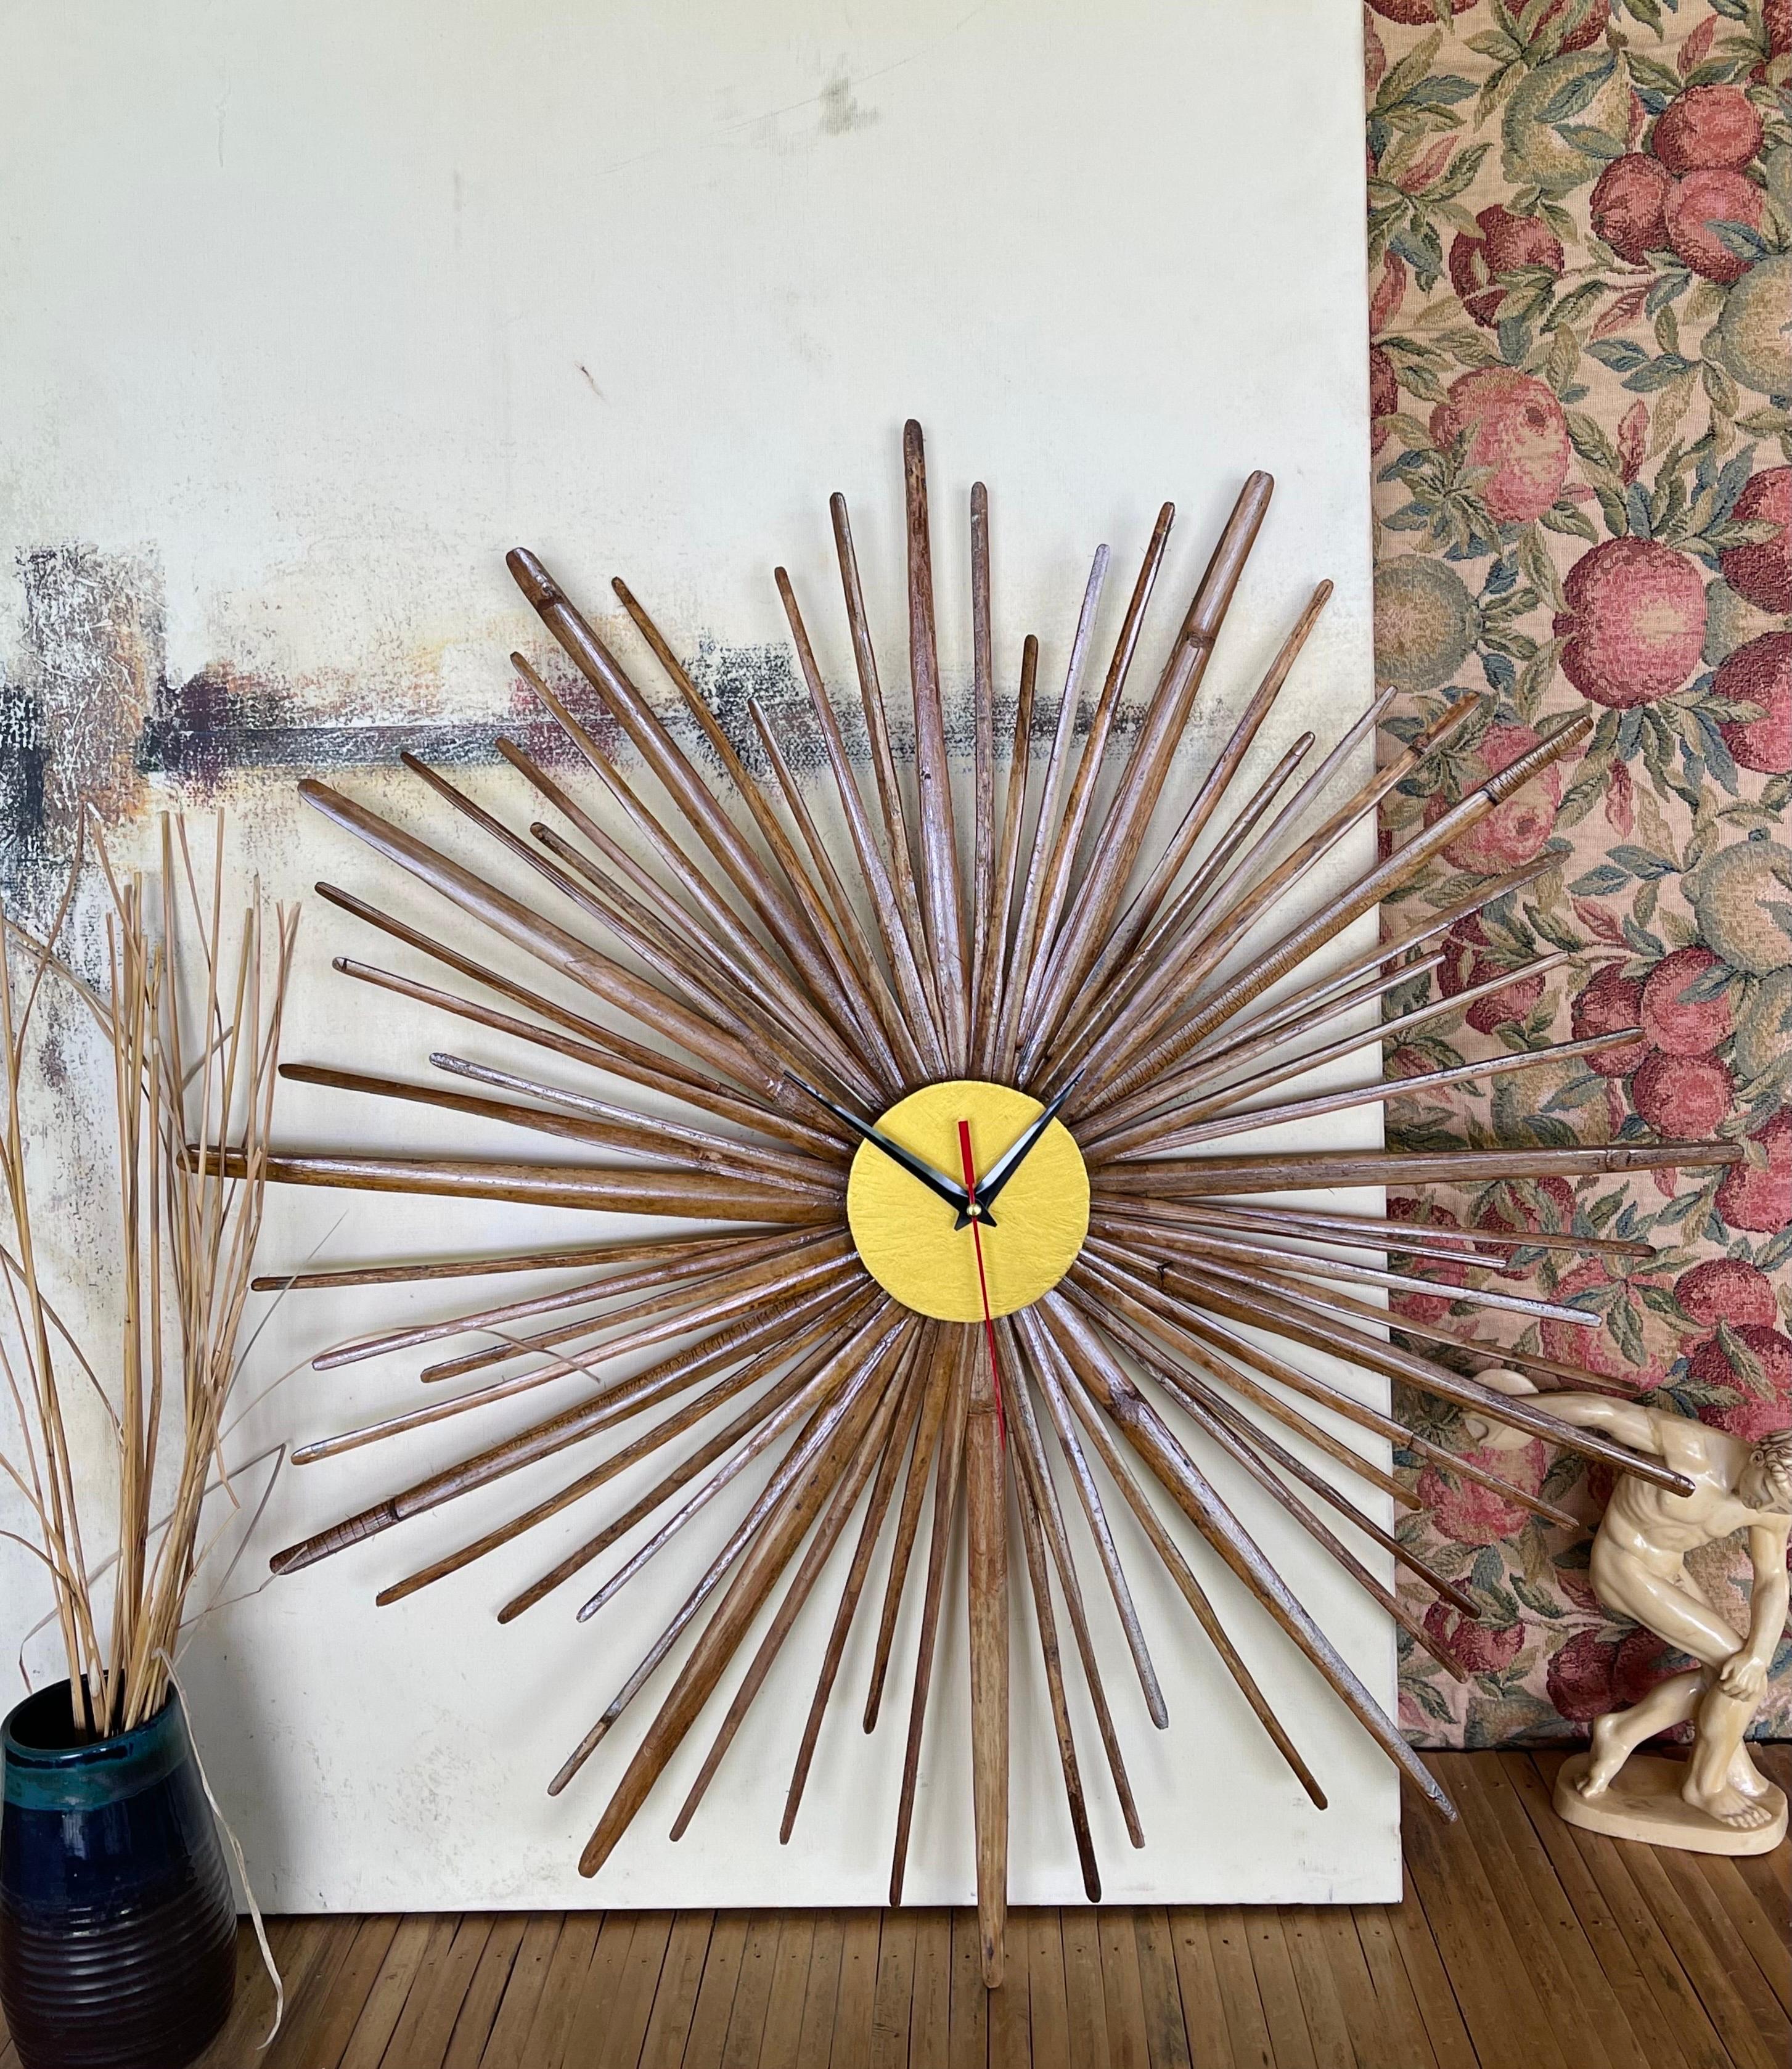 This is a High-quality Natural Rattan and Bamboo Mid Century style Starburst Clock Hand crafted by the local artisans in the Philippines

The clock measures 40cm in diameter


Natural Rattan pieces with lacquer 


Custom sizes are available, kindly